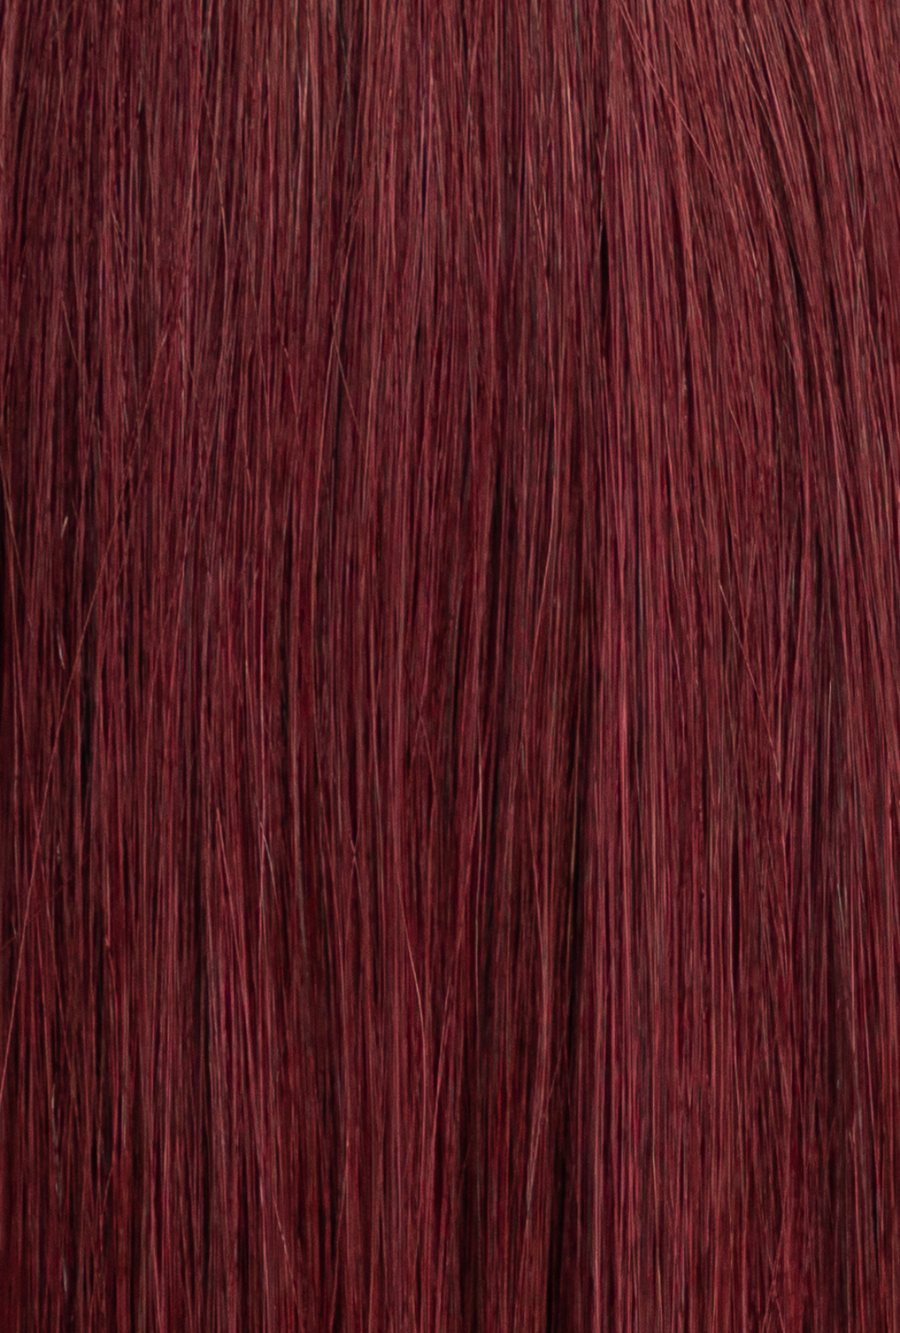 Laced Hair Clip-In Extensions #99J (Red Red Wine)